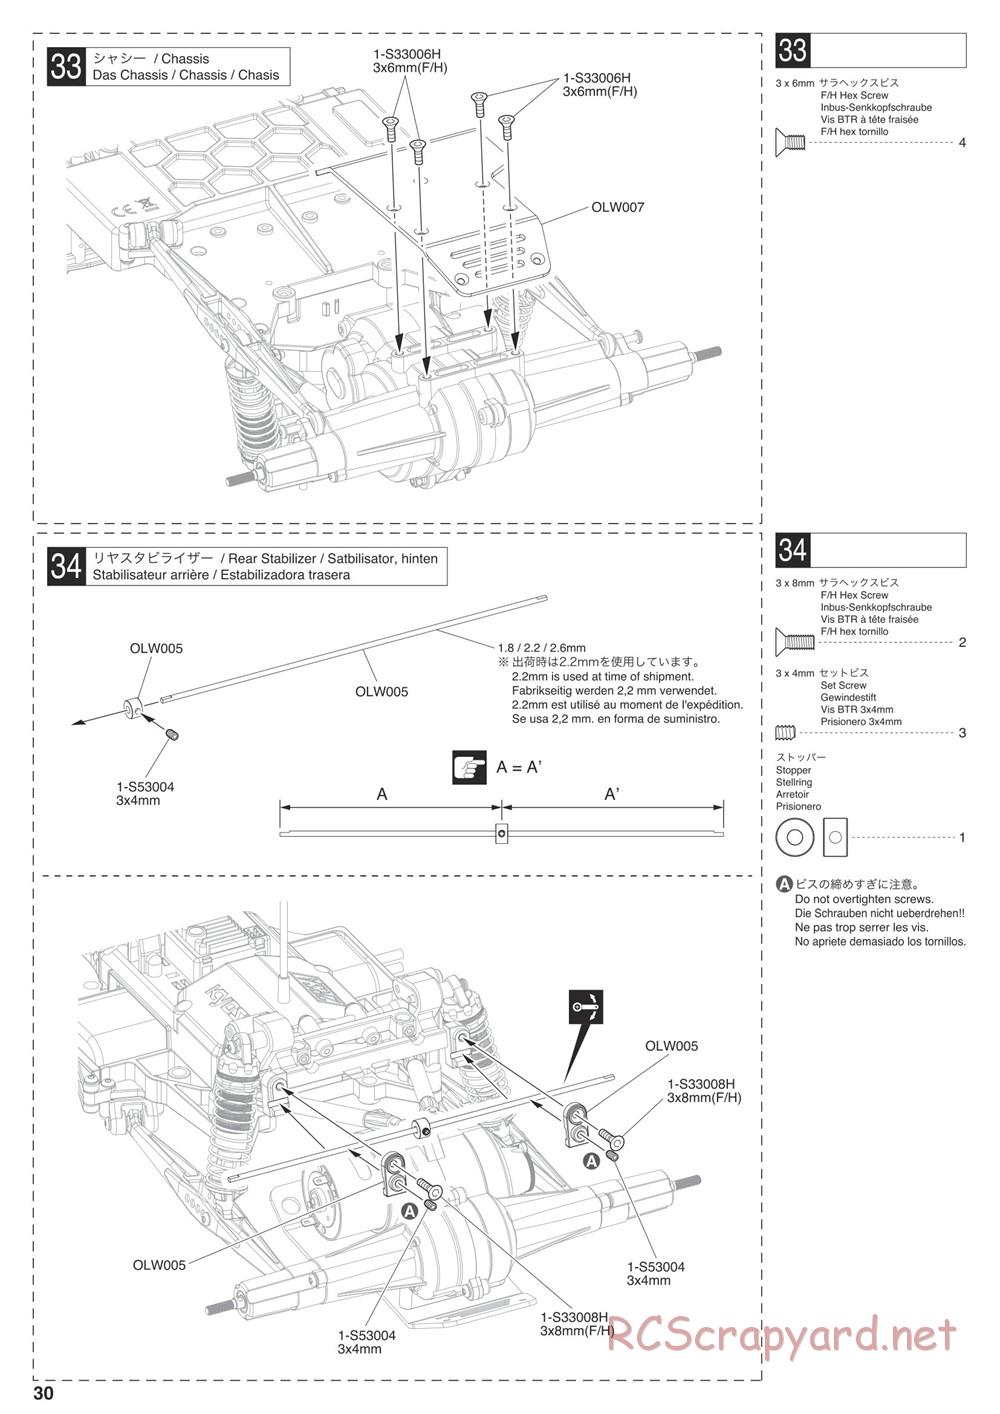 Kyosho - Outlaw Rampage Pro - Manual - Page 30